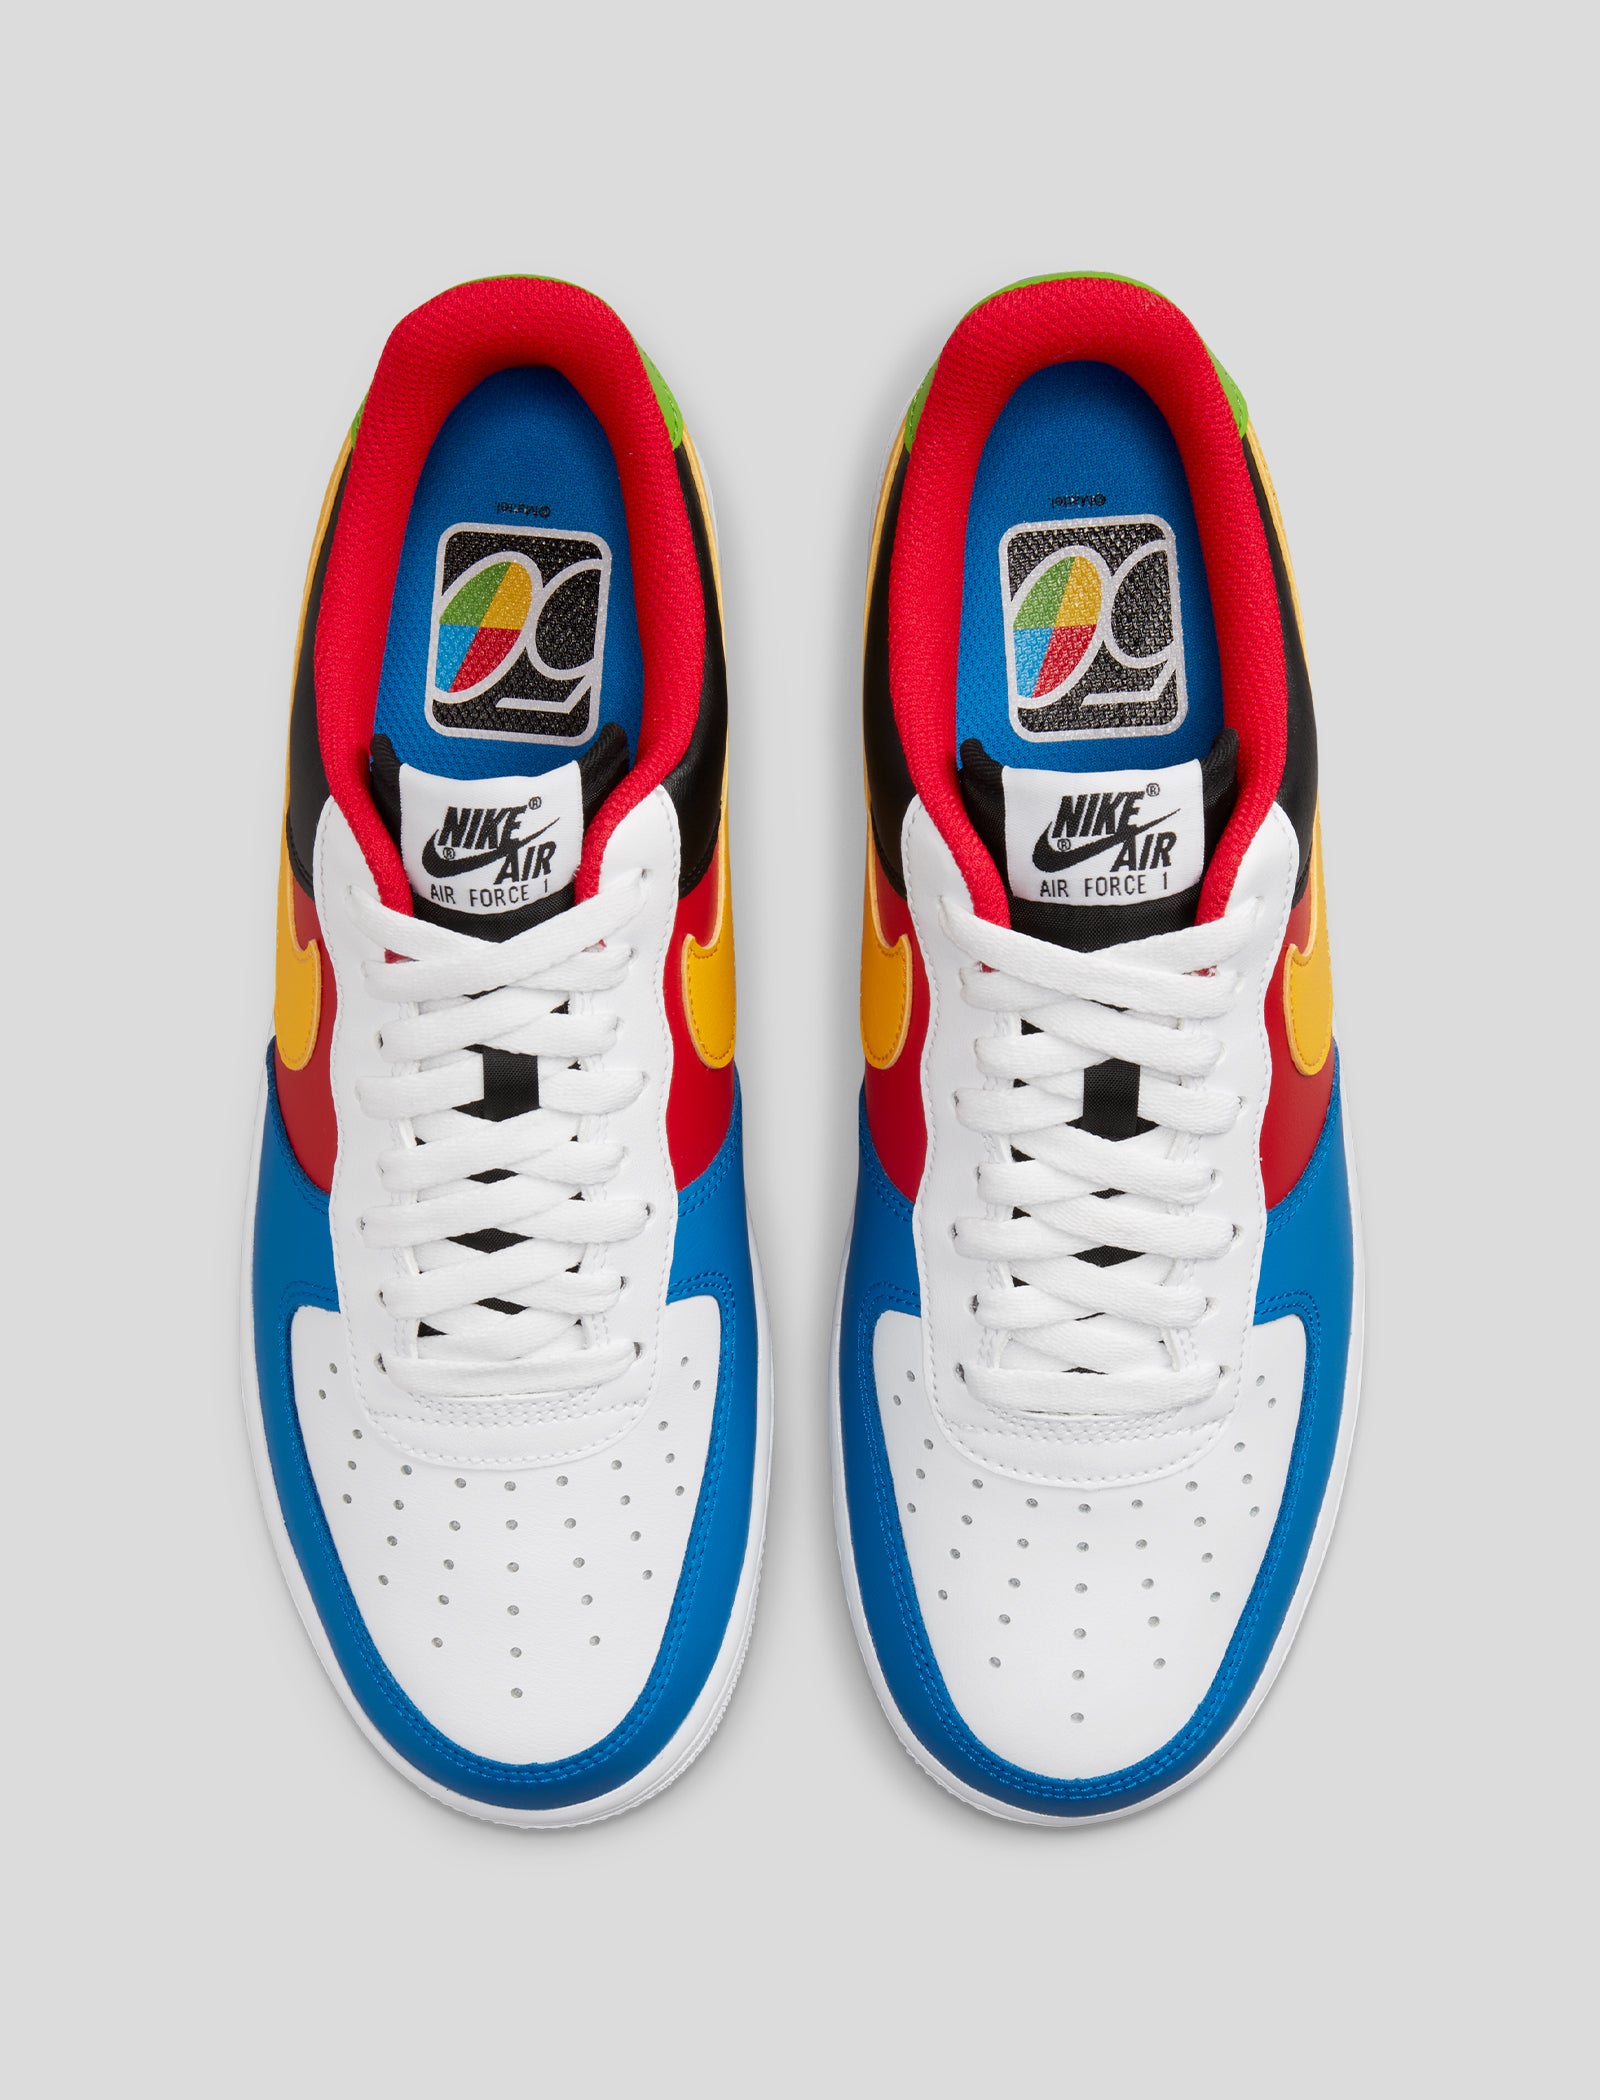 AIR FORCE 1 '07 "UNO"